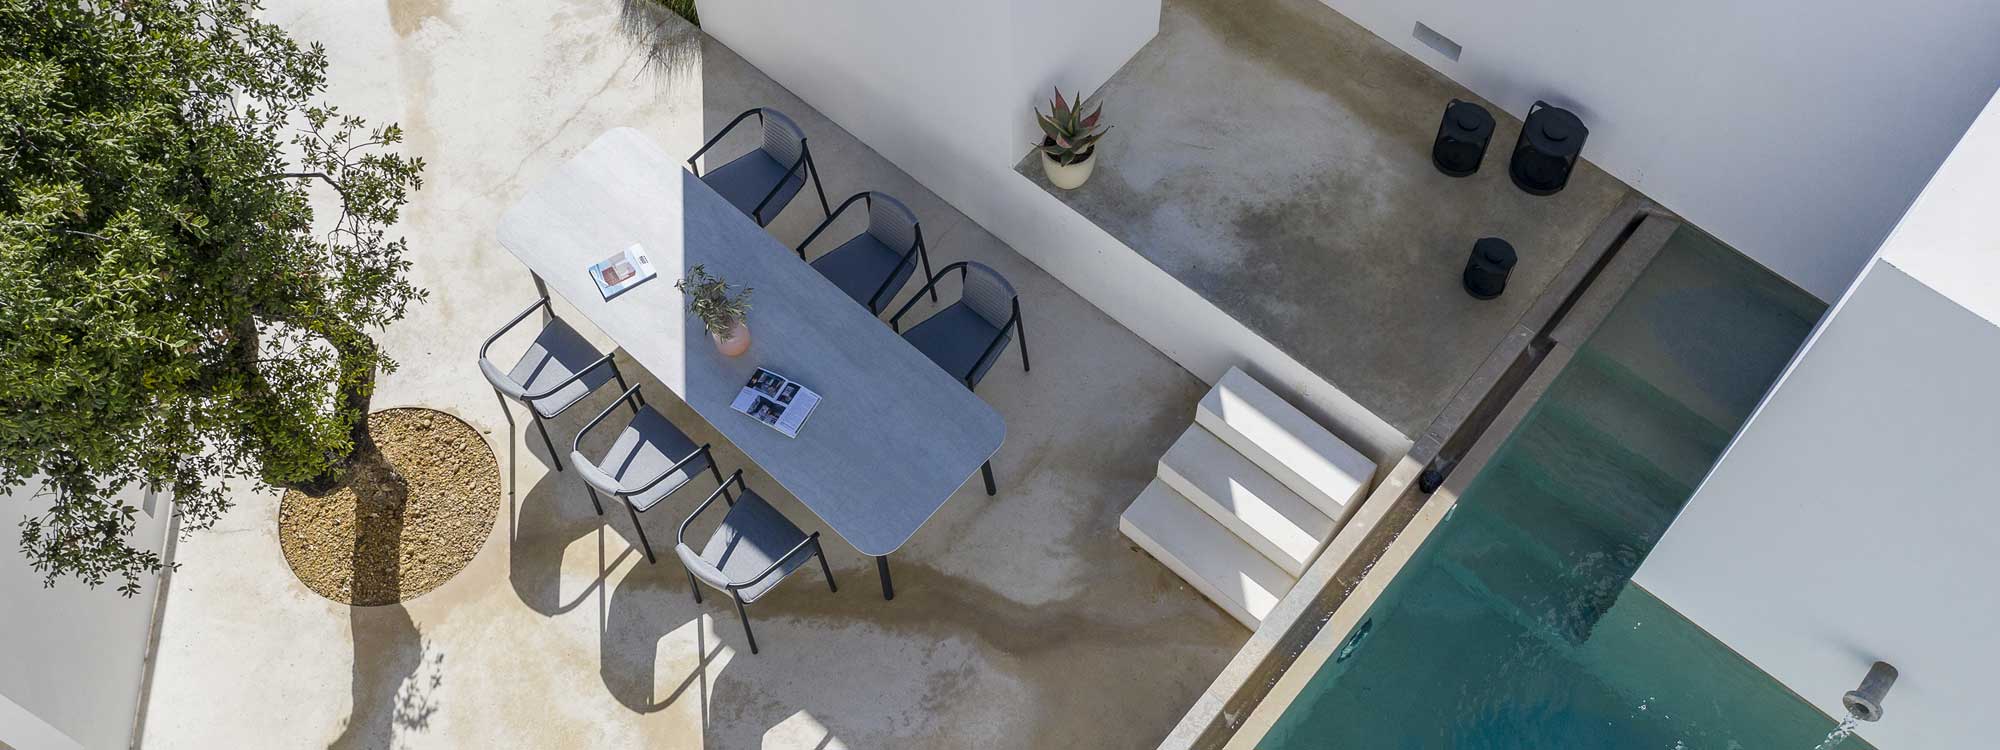 Image of birdseye view of Duct Round chair and Starling modern garden table on contemporary terrace